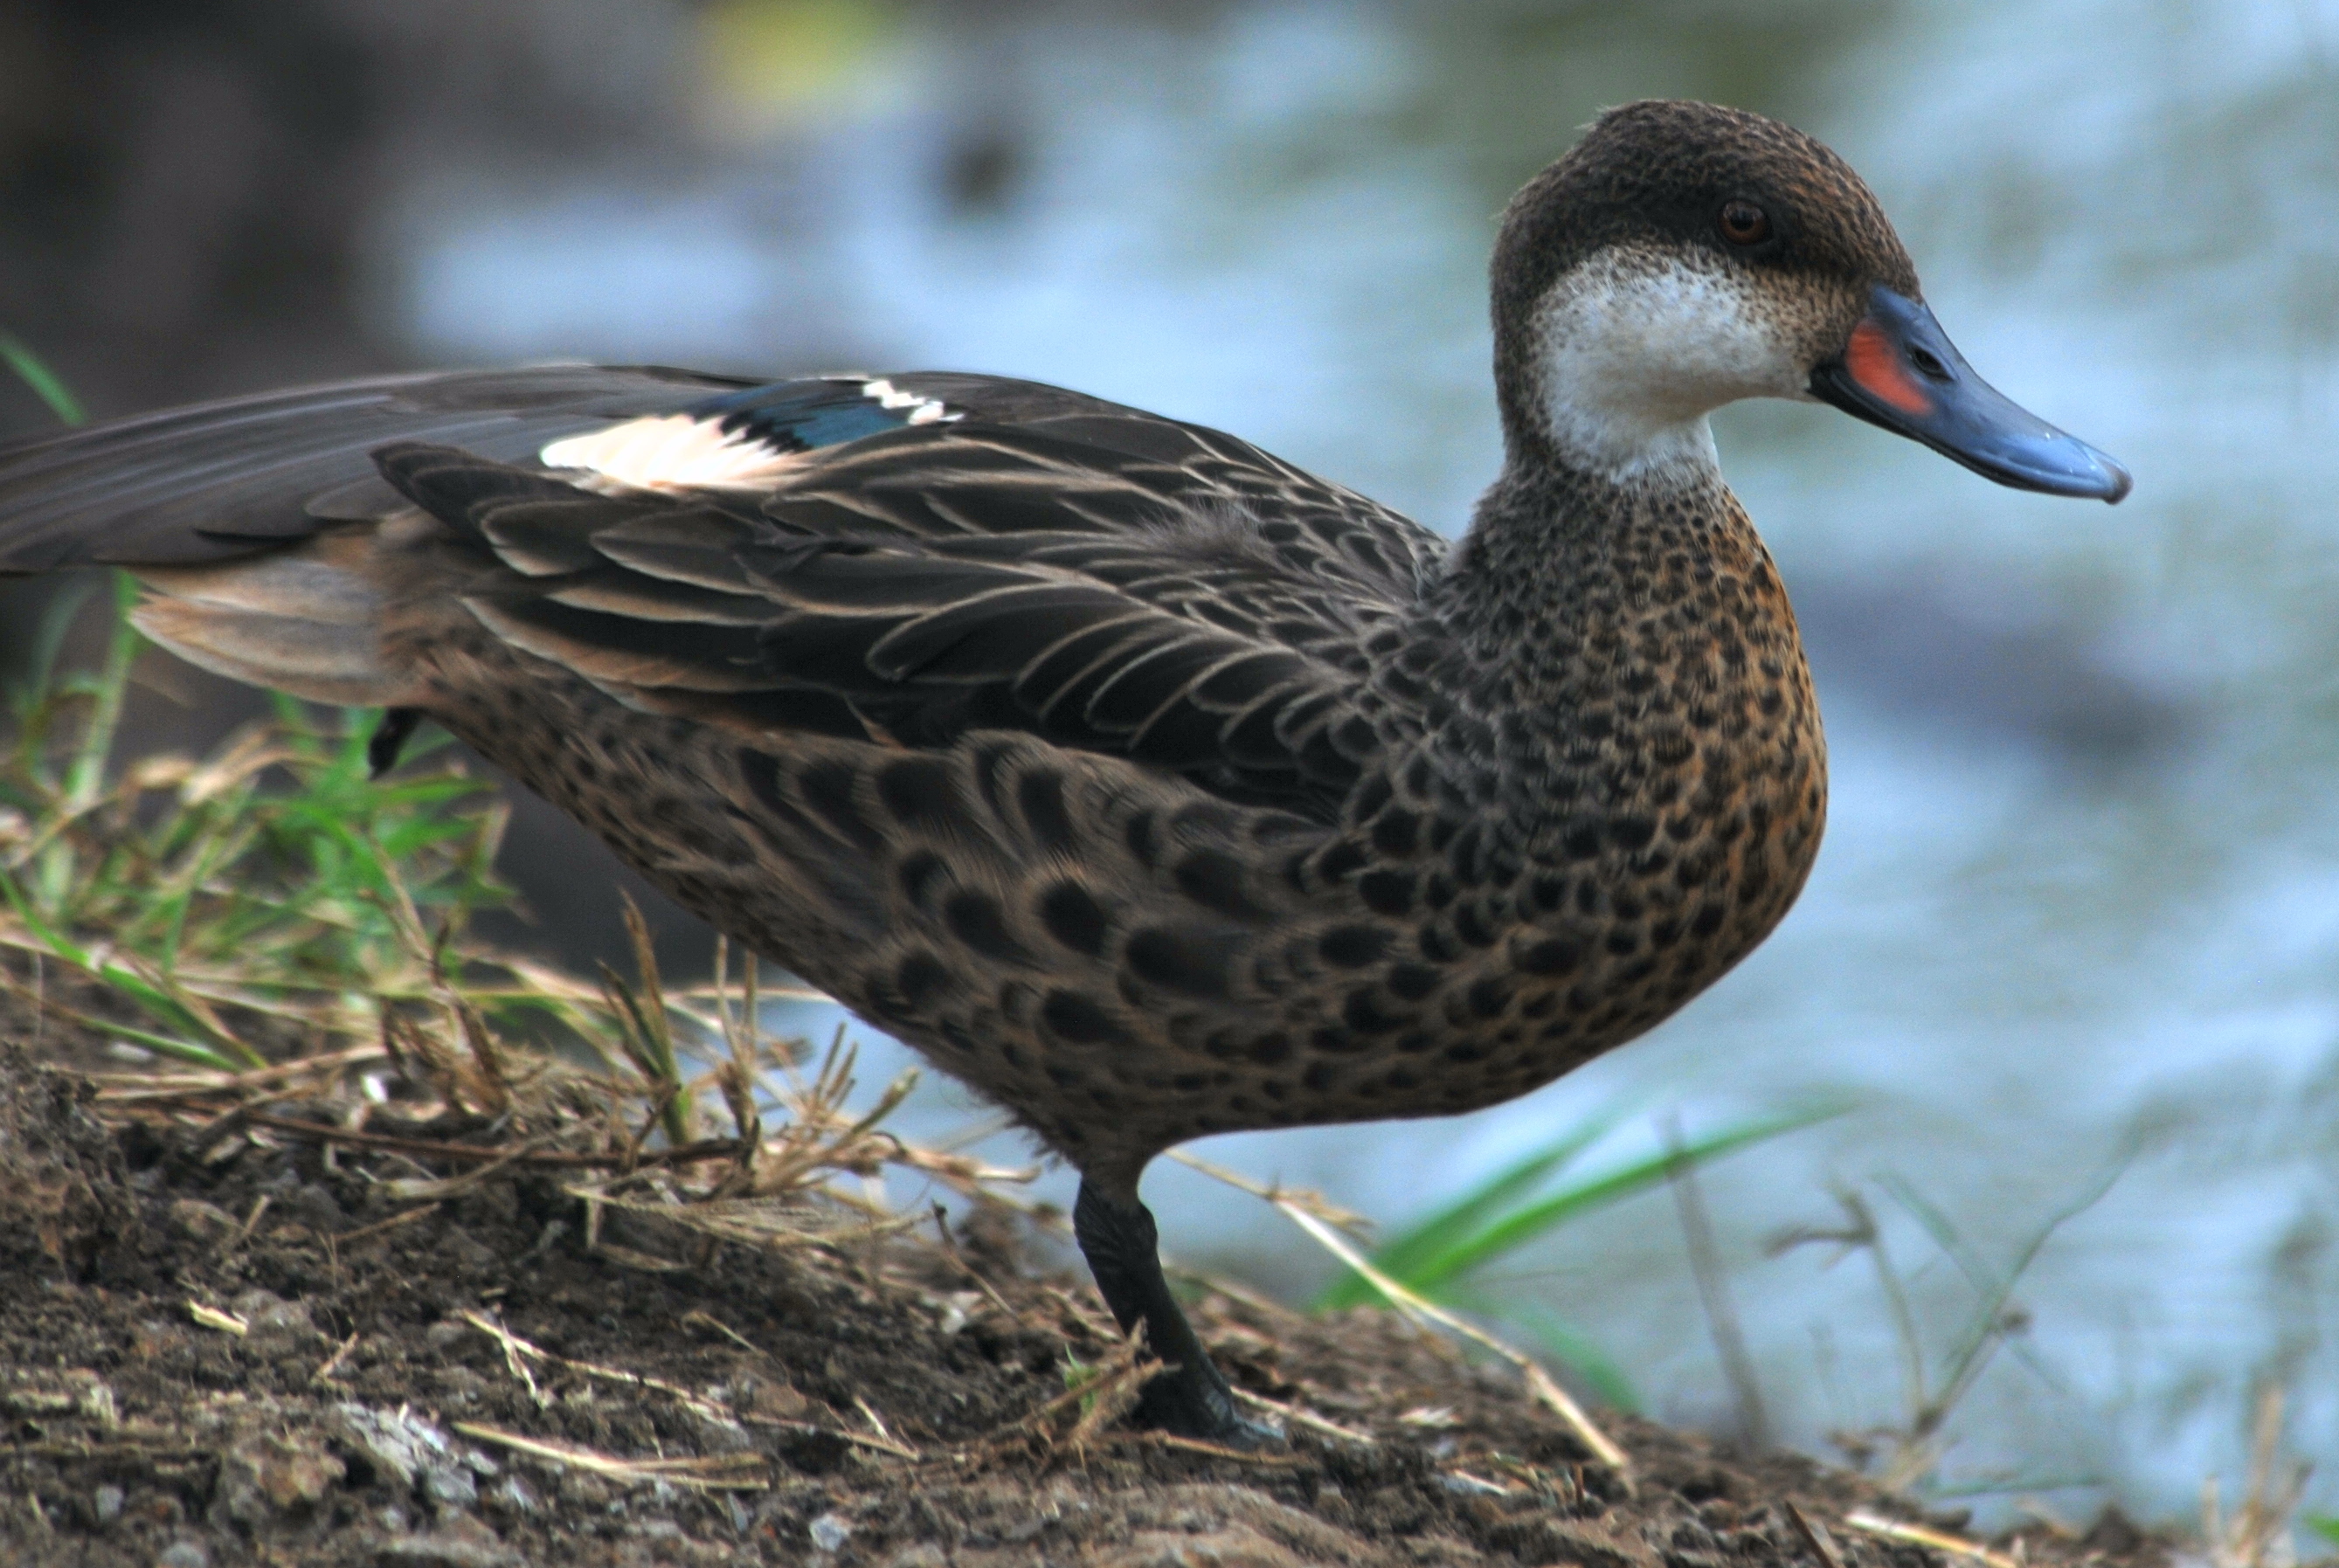 Click picture to see more White-cheeked Pintails.